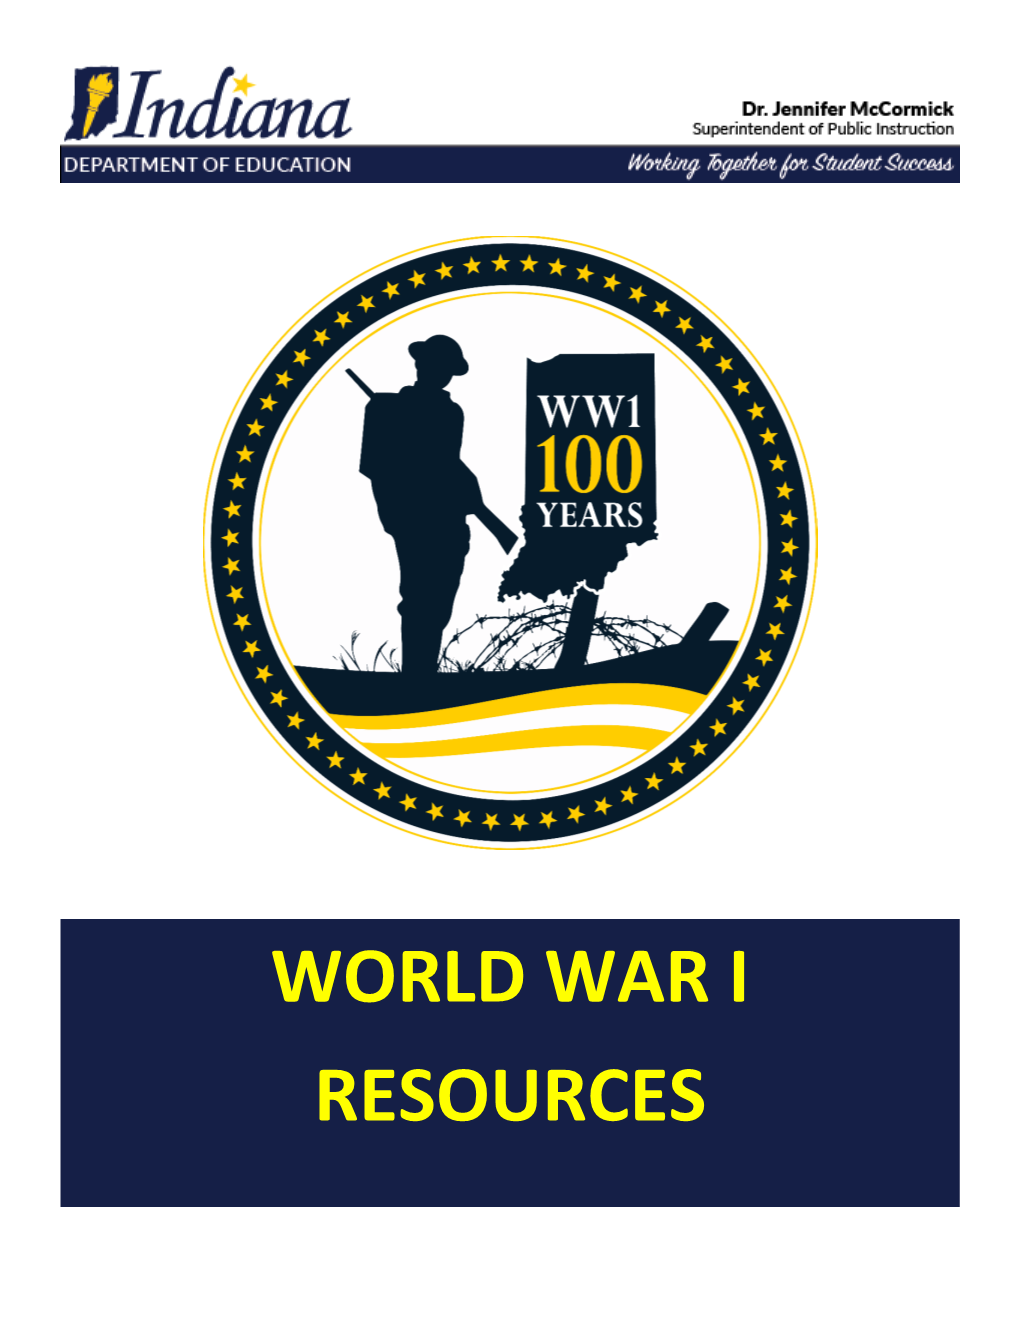 WWI Resources